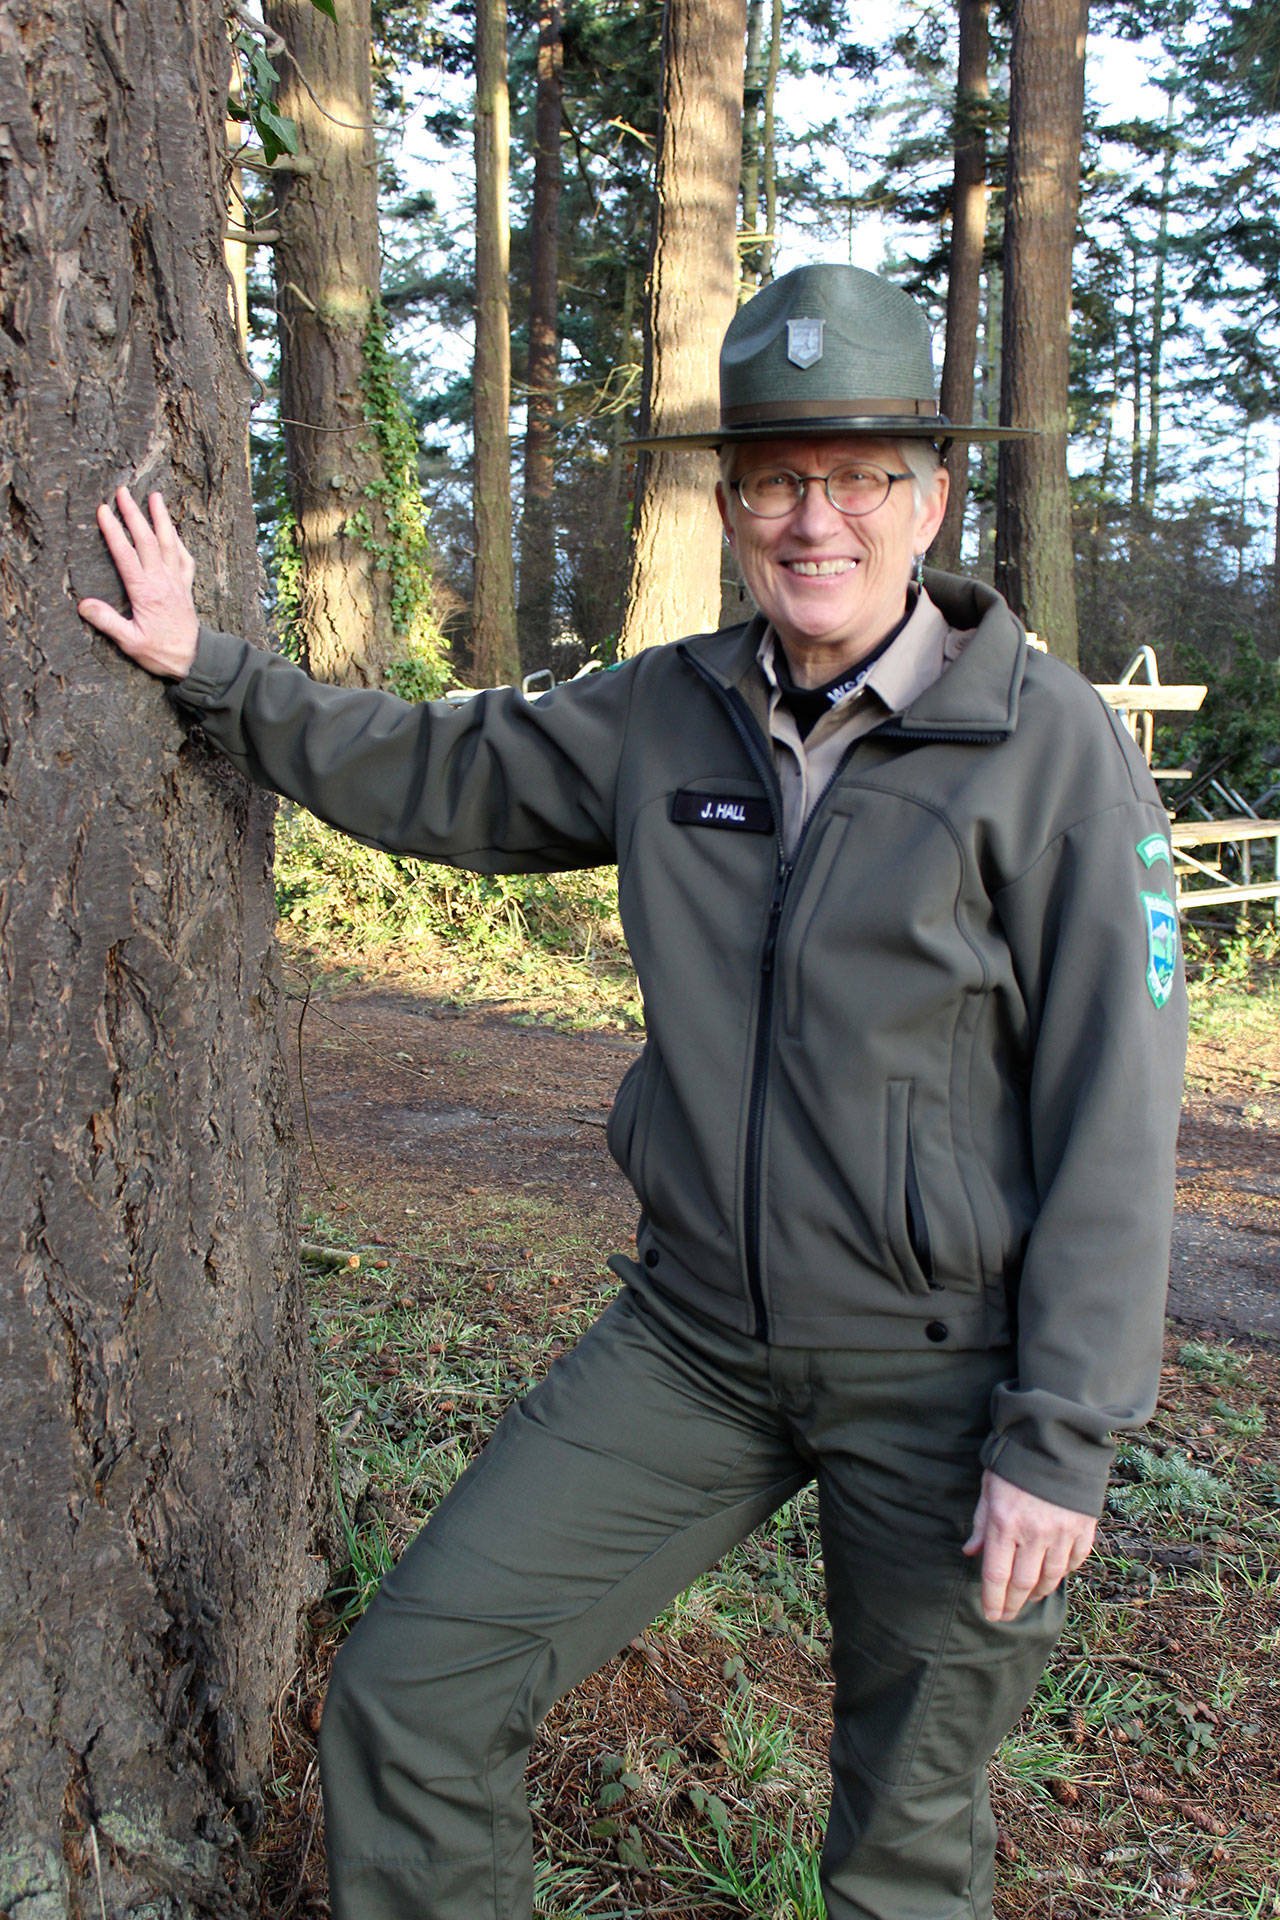 Photo by Patricia Guthrie/Whidbey News-Times                                Interpretive Specialist Janet Hall will be leading a guided hike at Fort Ebey State Park on New Year’s Day, one of 33 outdoor First Day activities organized by Washington State Parks.